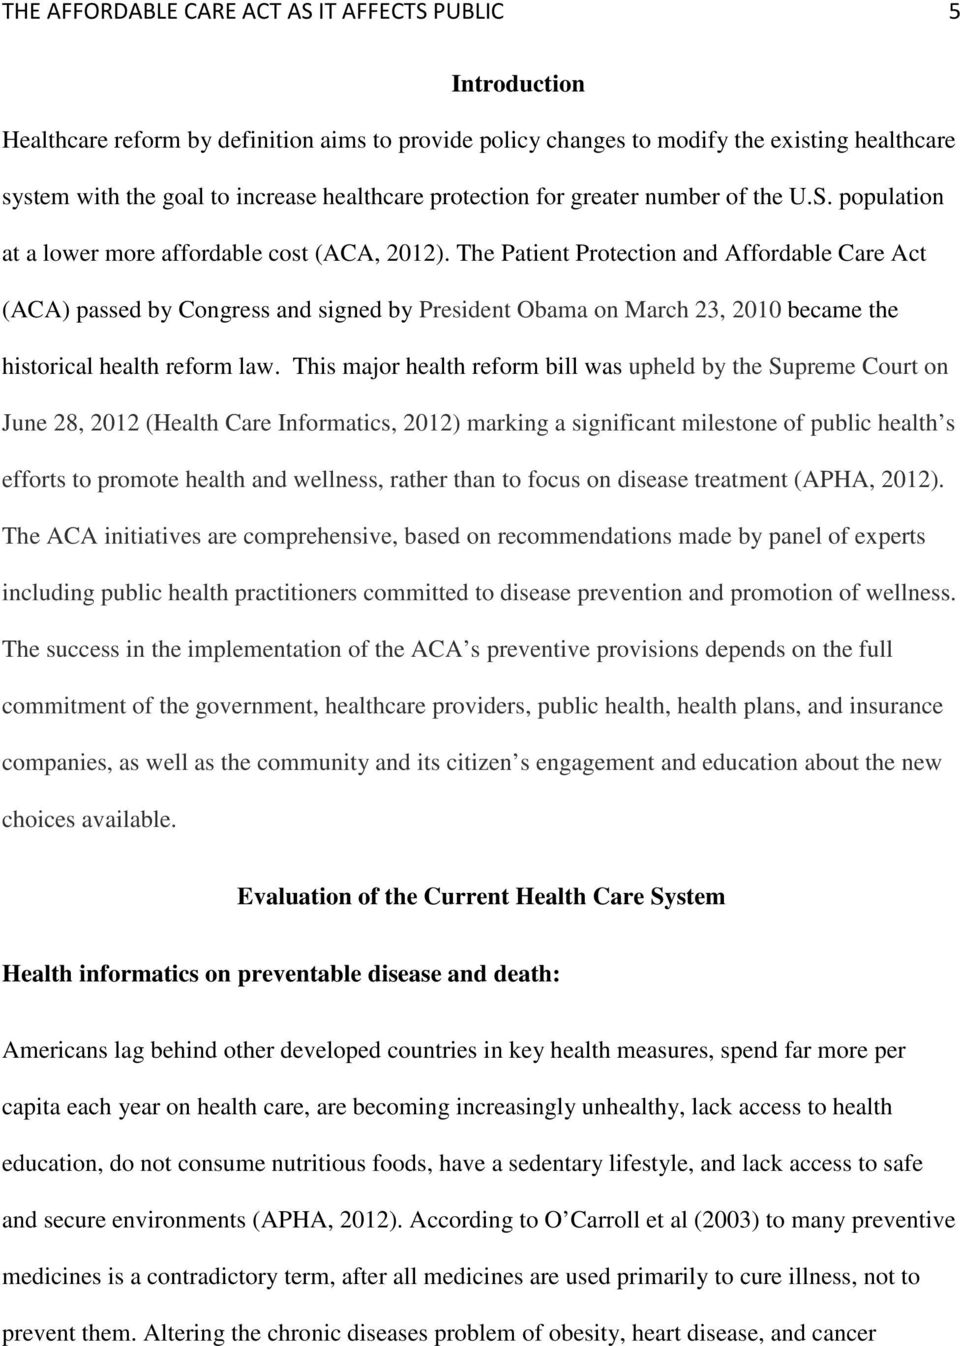 The Patient Protection and Affordable Care Act (ACA) passed by Congress and signed by President Obama on March 23, 2010 became the historical health reform law.